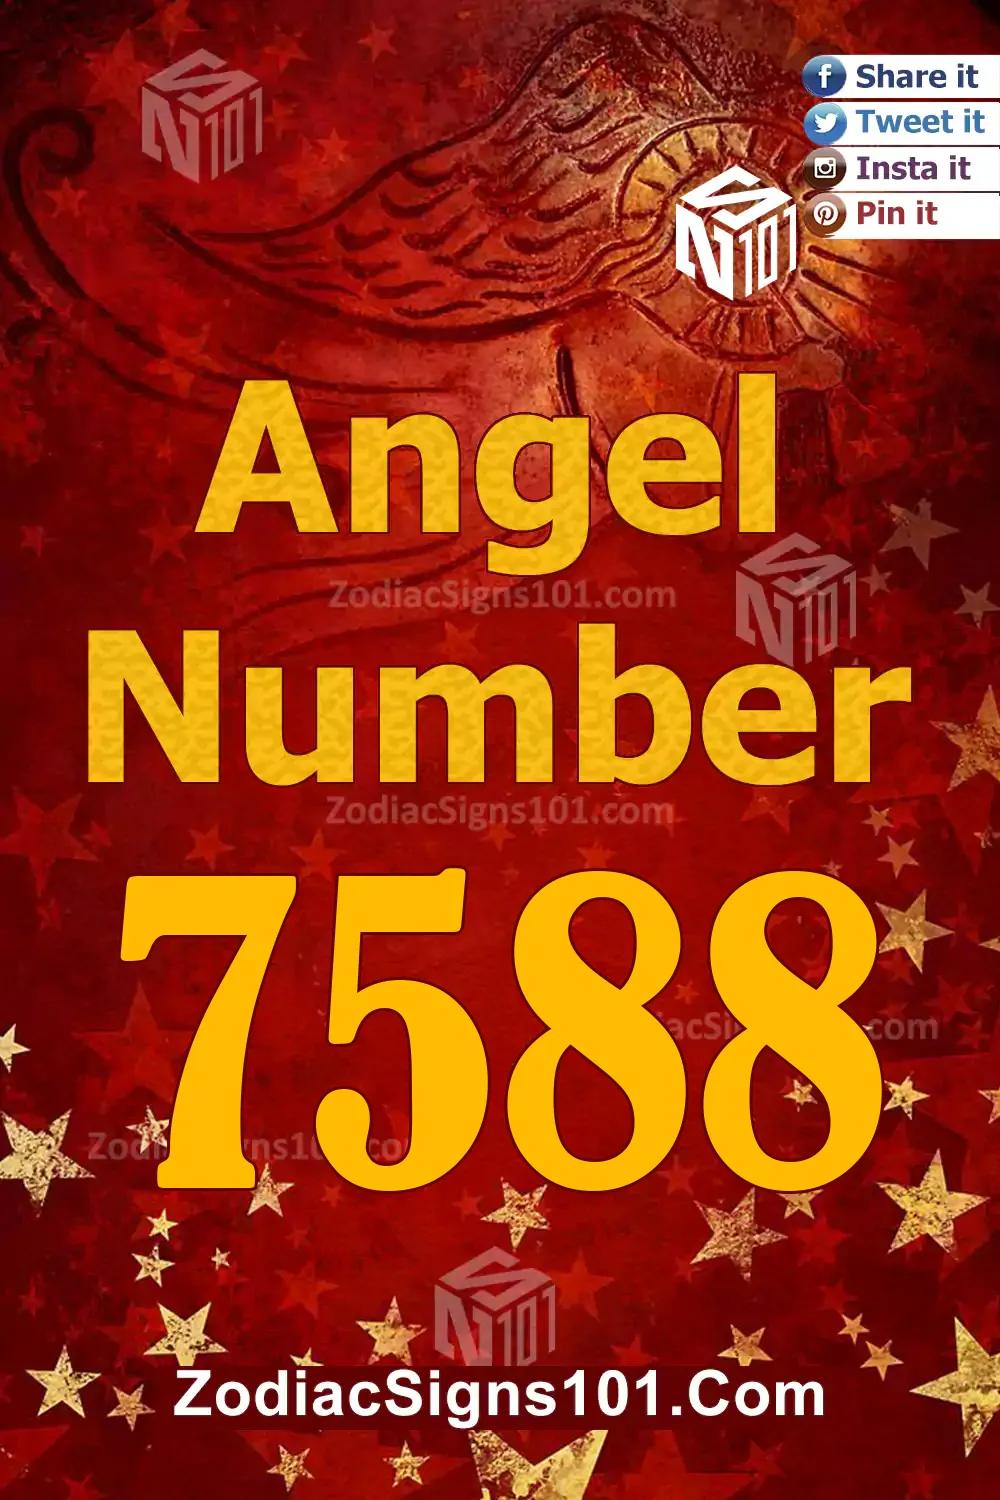 7588 Angel Number Meaning